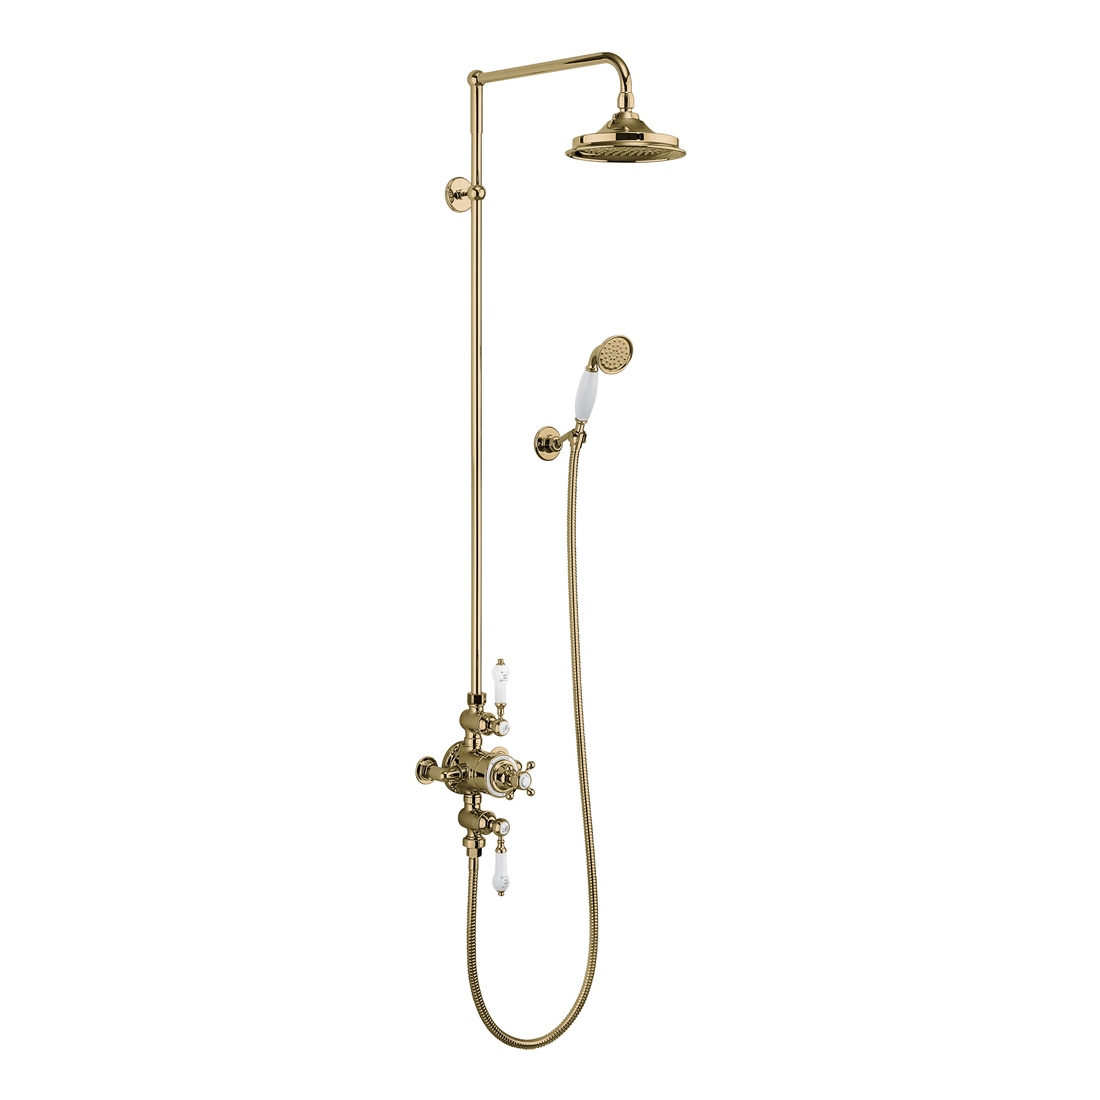 Avon Thermostatic Exposed Shower Valve Two Outlet,Rigid Riser, Swivel Shower Arm, Handset & Holder with Hose with 9 inch rose  - GOLD